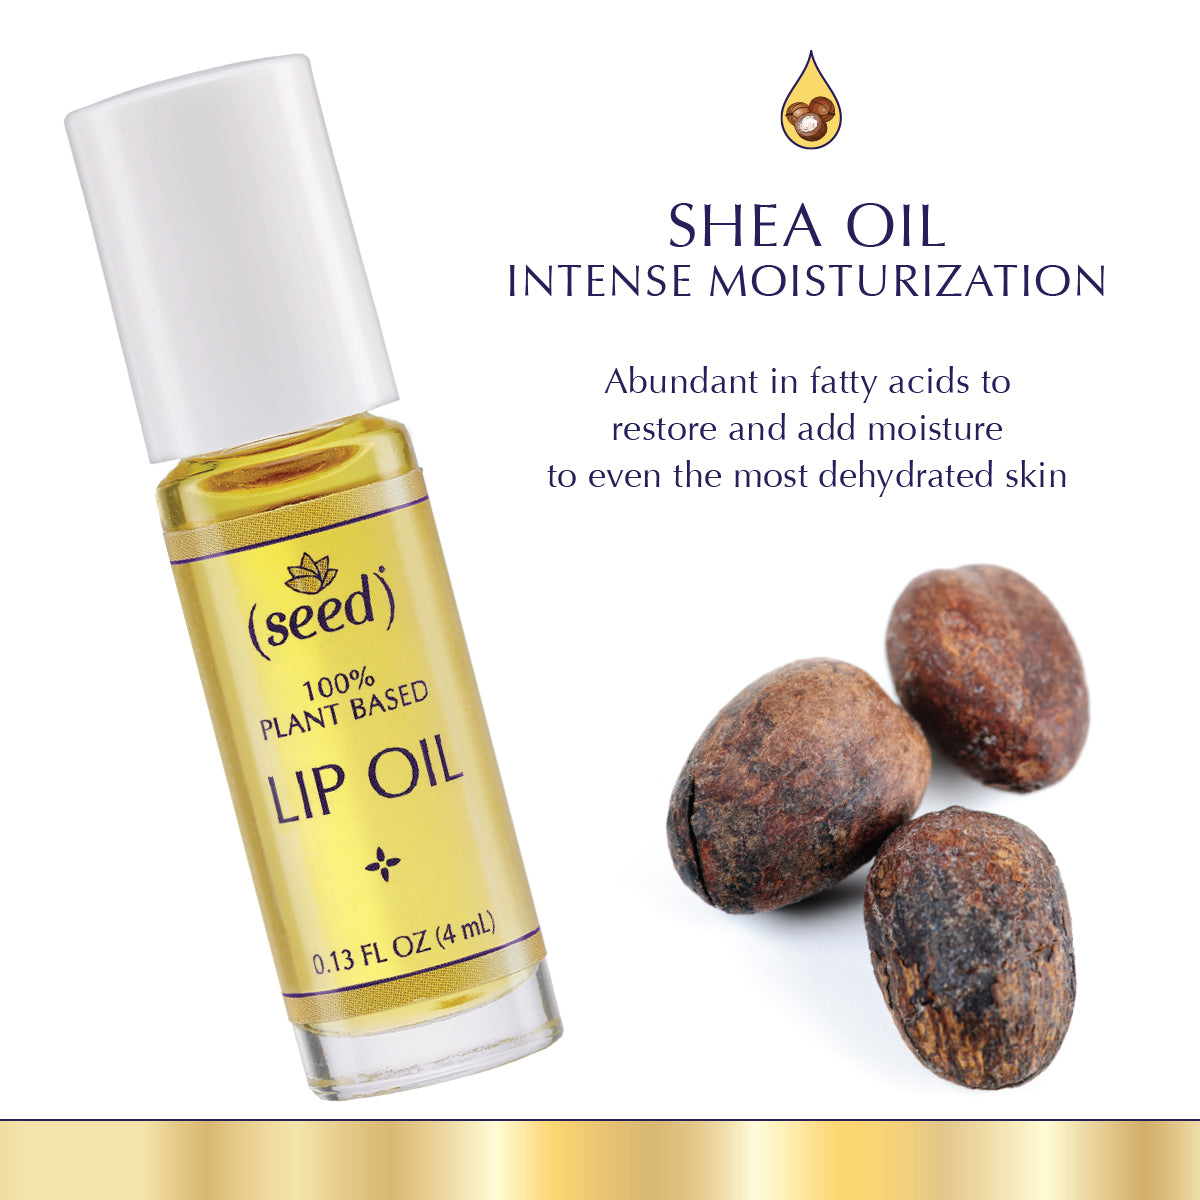 Seed Lip Oil features shea oil for intensive moisturization